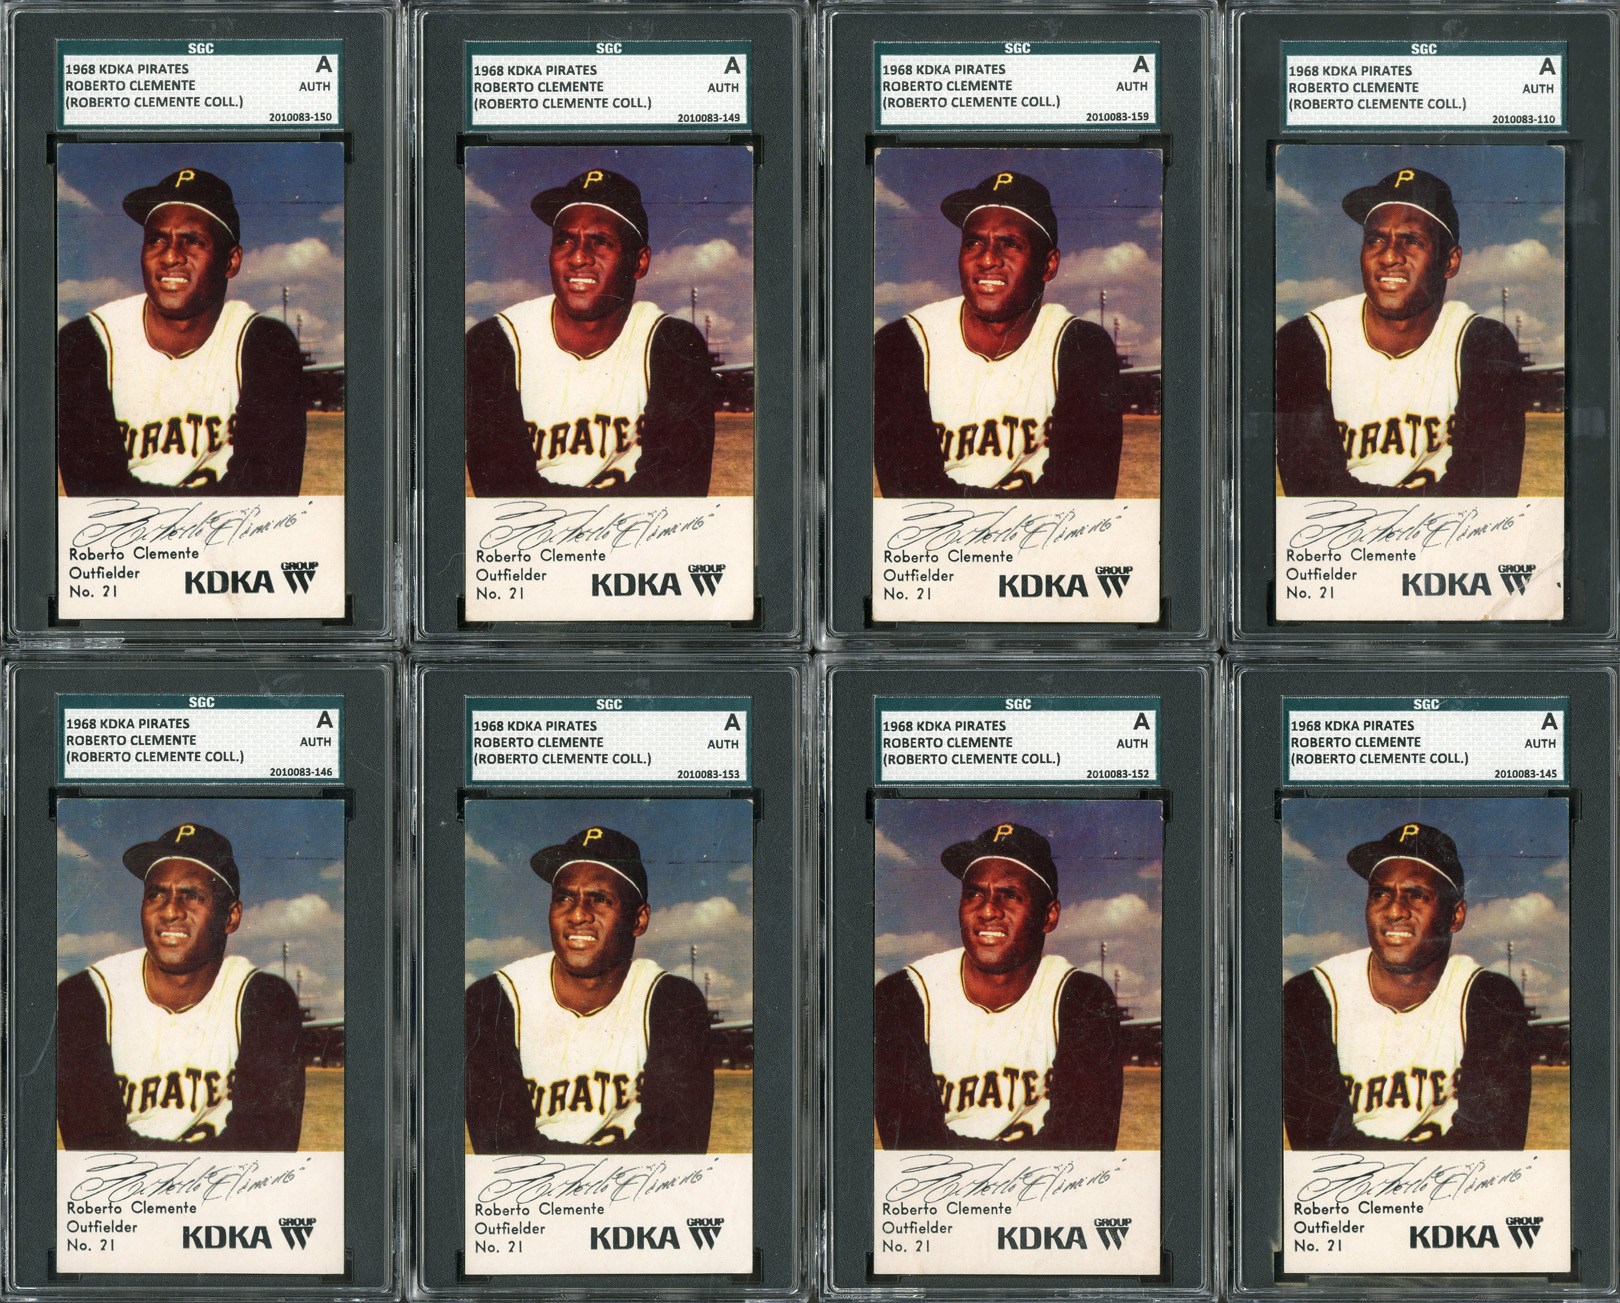 1968 KDKA Pirates Roberto Clemente (from Clemente Collection) - SGC AUTH